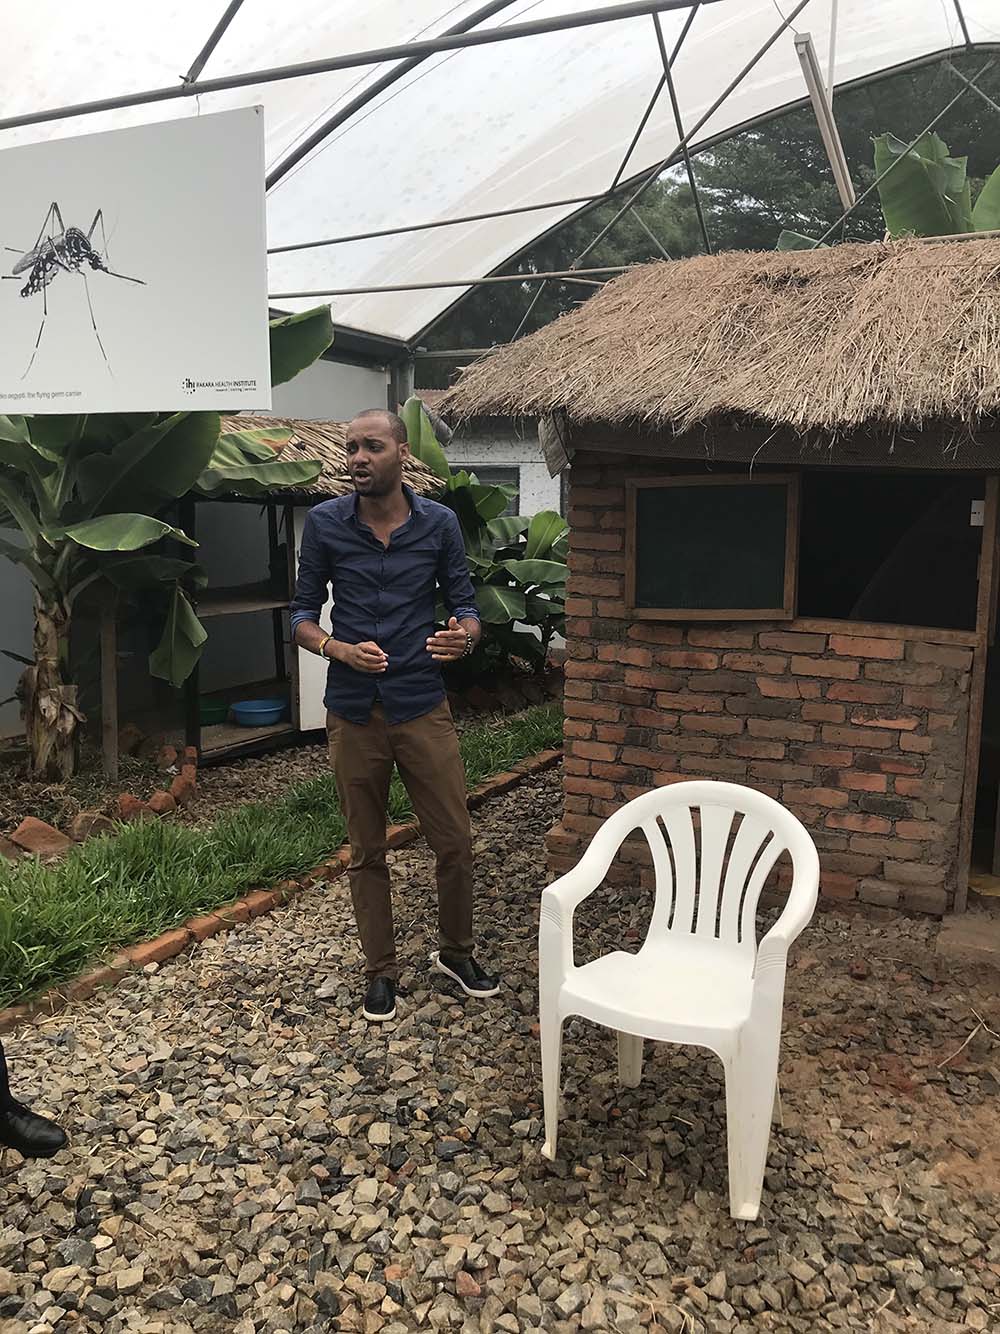 Arnold Mmbando, describing the operation of eave ribbons attached to an experimental hut, January 2020. Photo by Ann H. Kelly and Javier Lezaun.